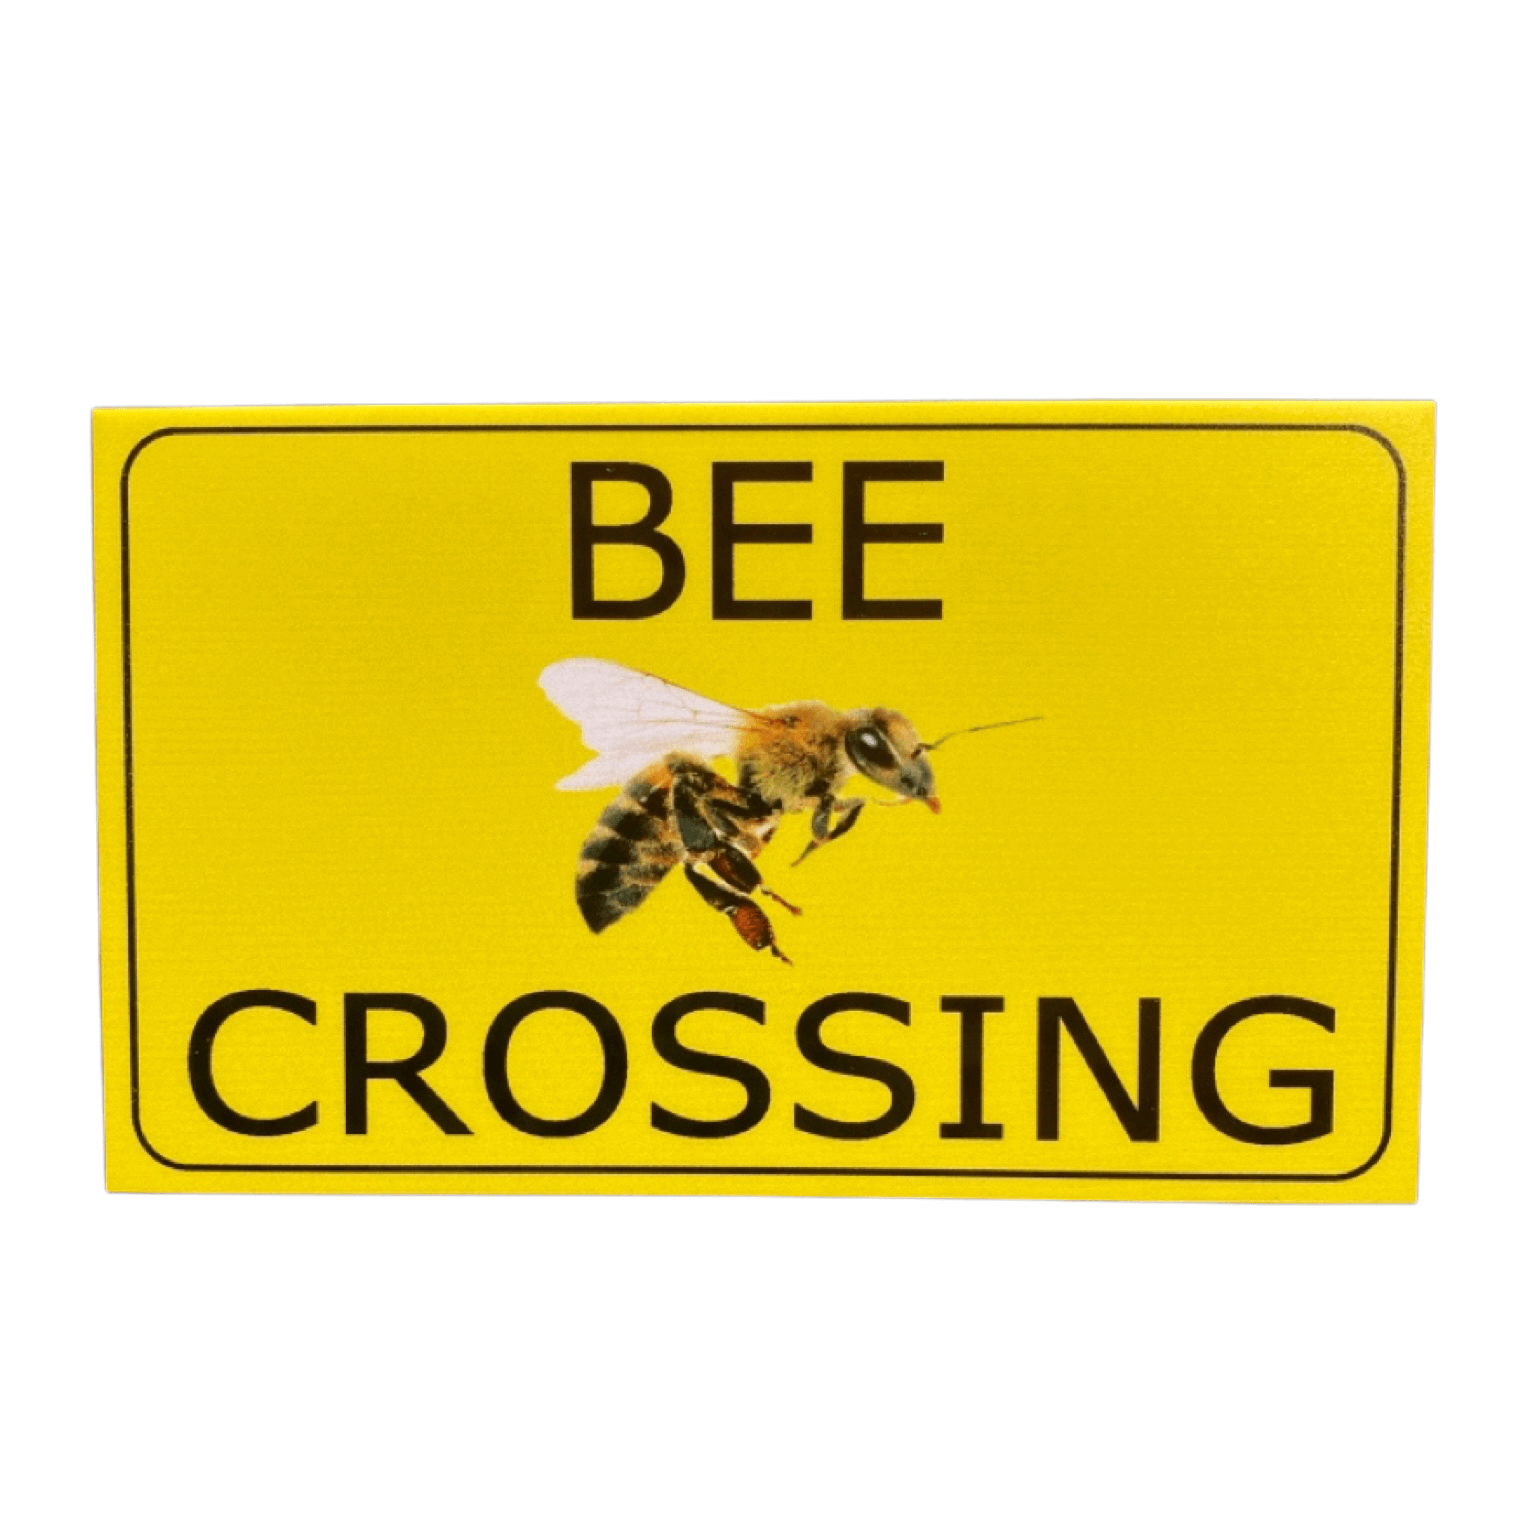 Bee Crossing Sign - The Renmy Store Homewares & Gifts 